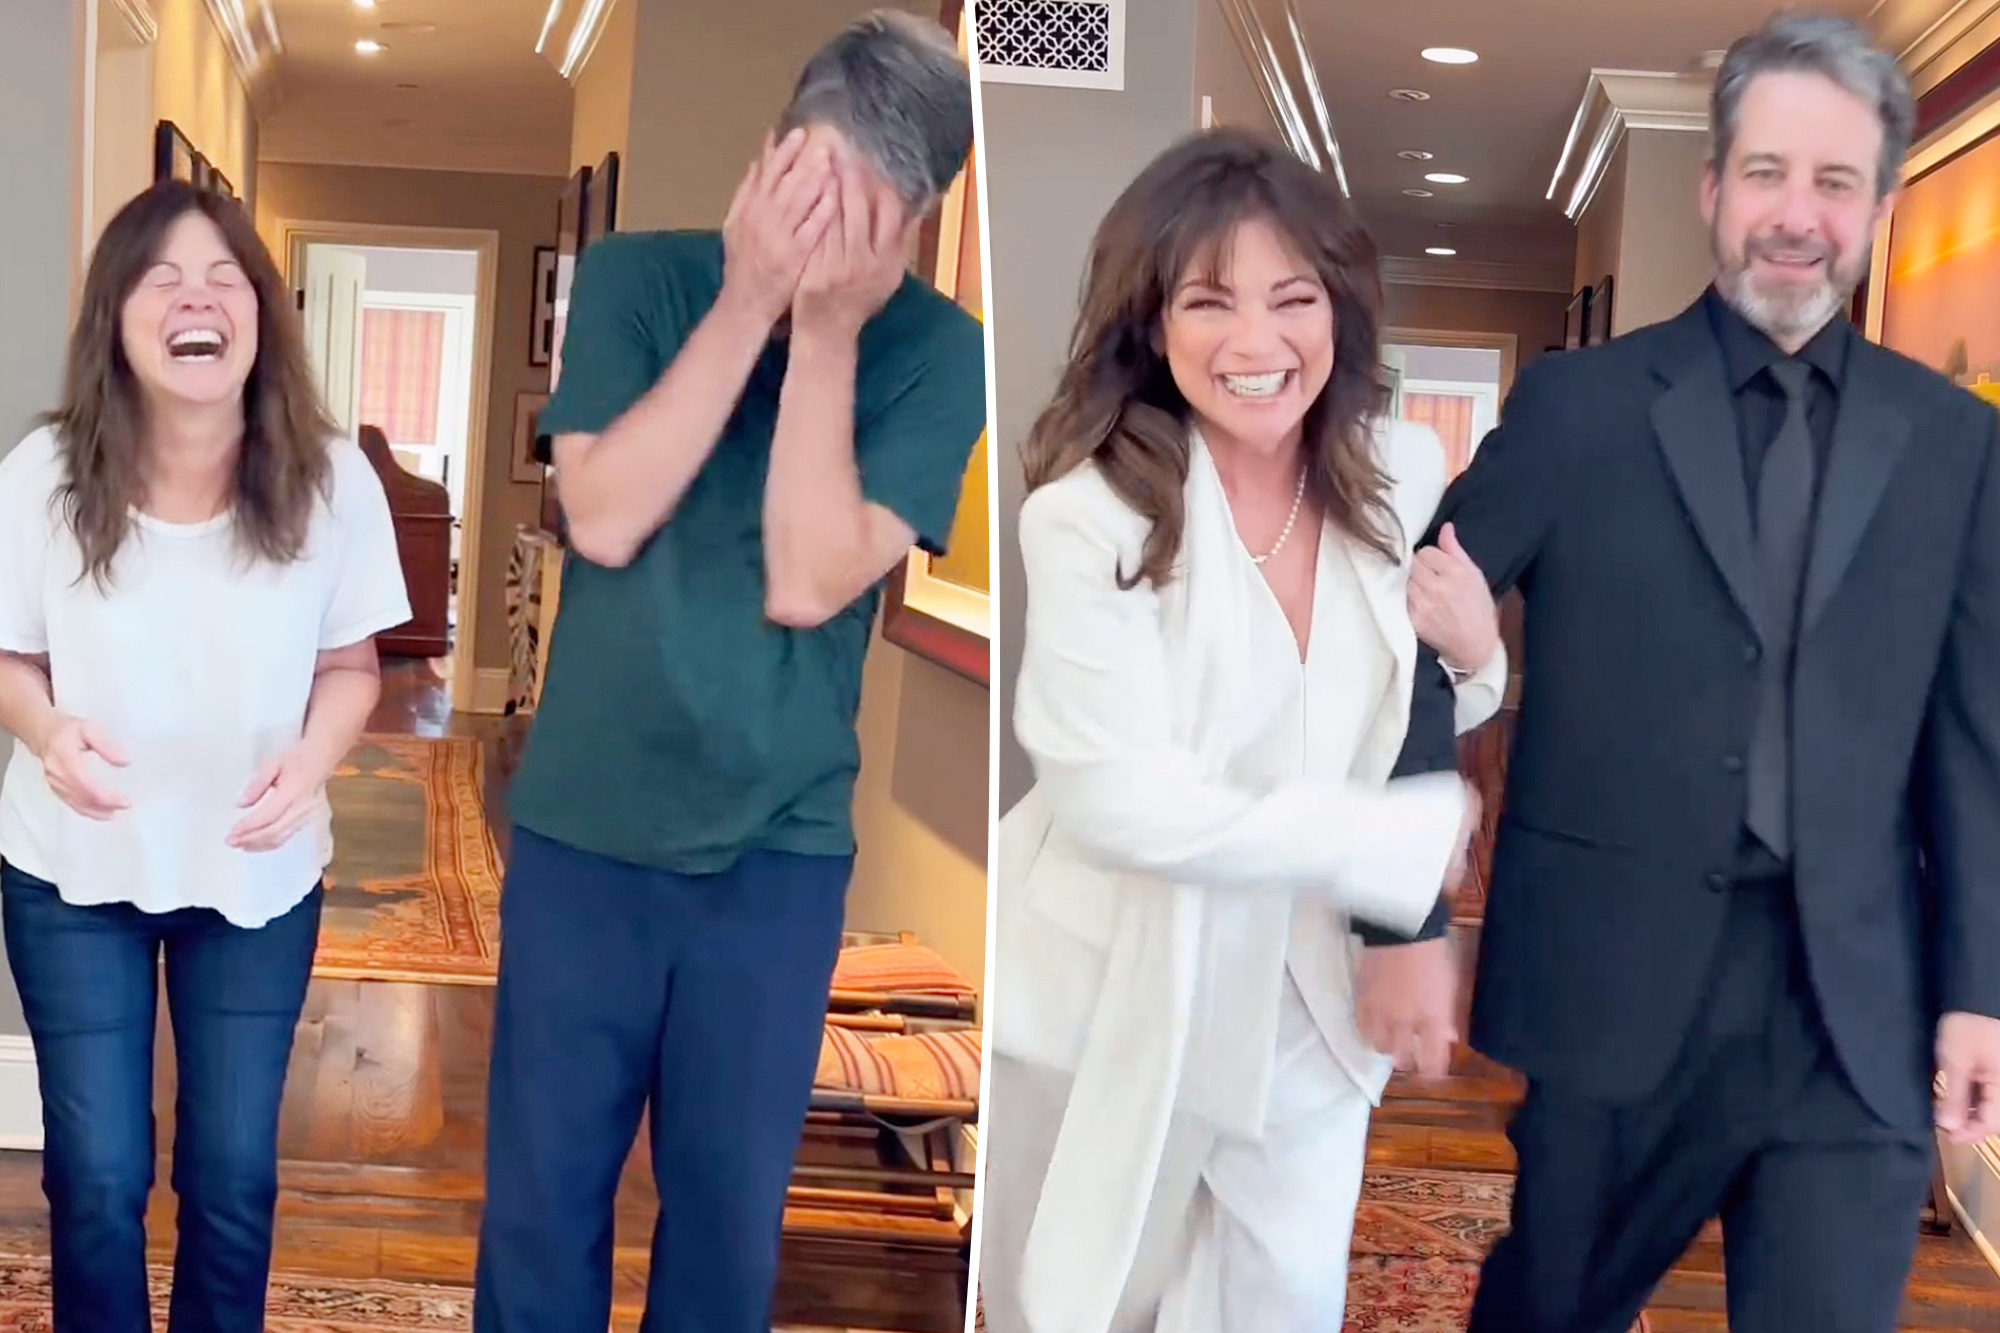 Valerie Bertinelli and Mike Goodnough Embrace Fun and Fashion in Transformation Video